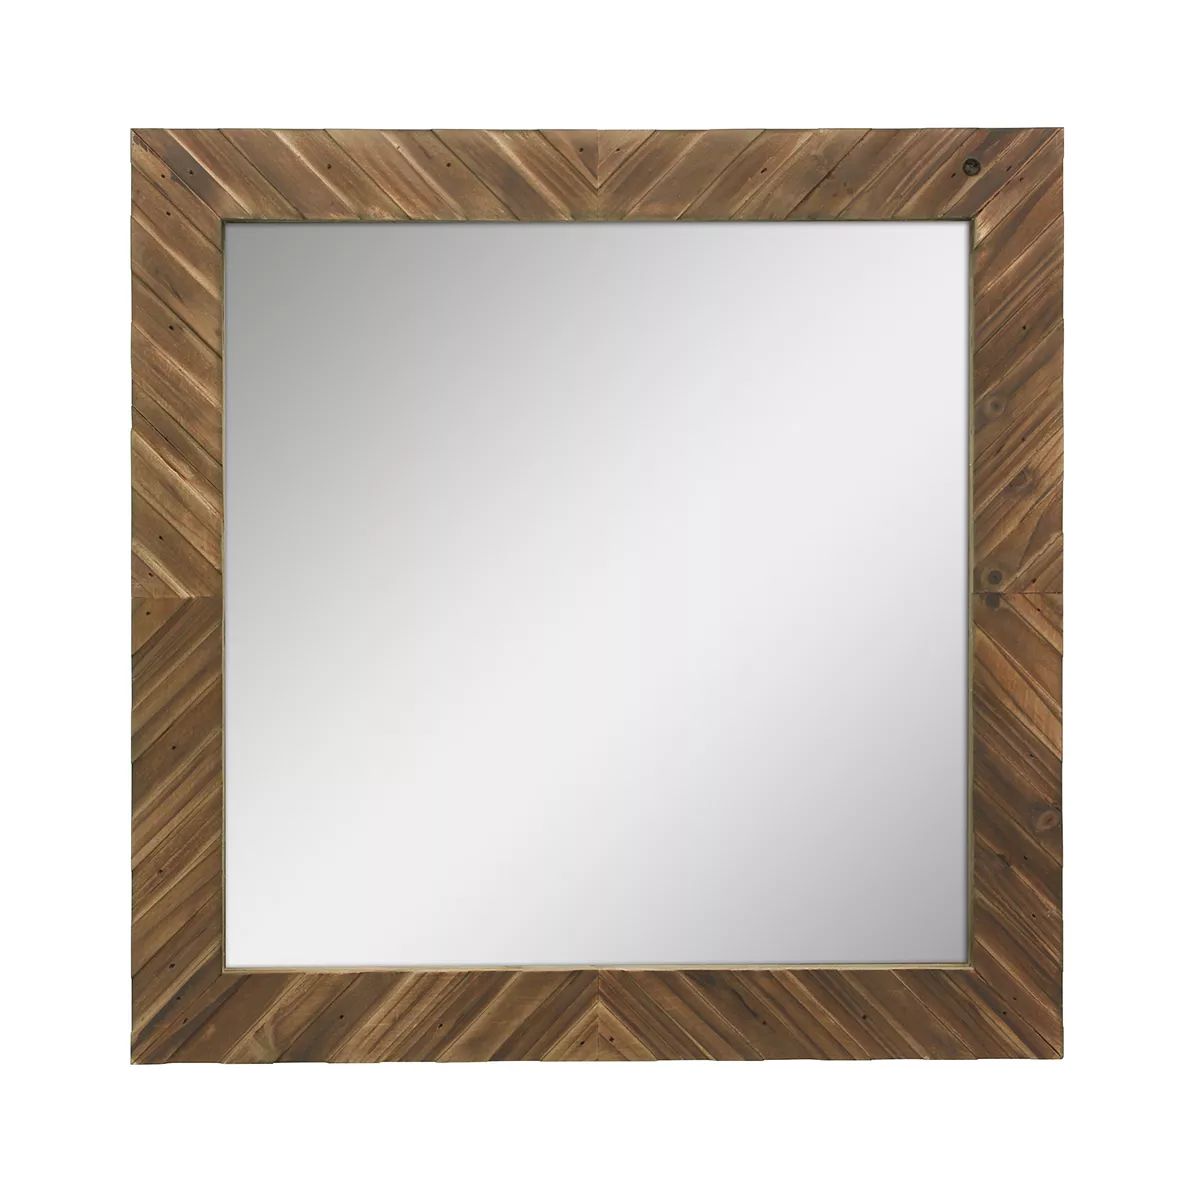 Stonebriar Collection Wooden Chevron Hanging Wall Mirror | Kohl's